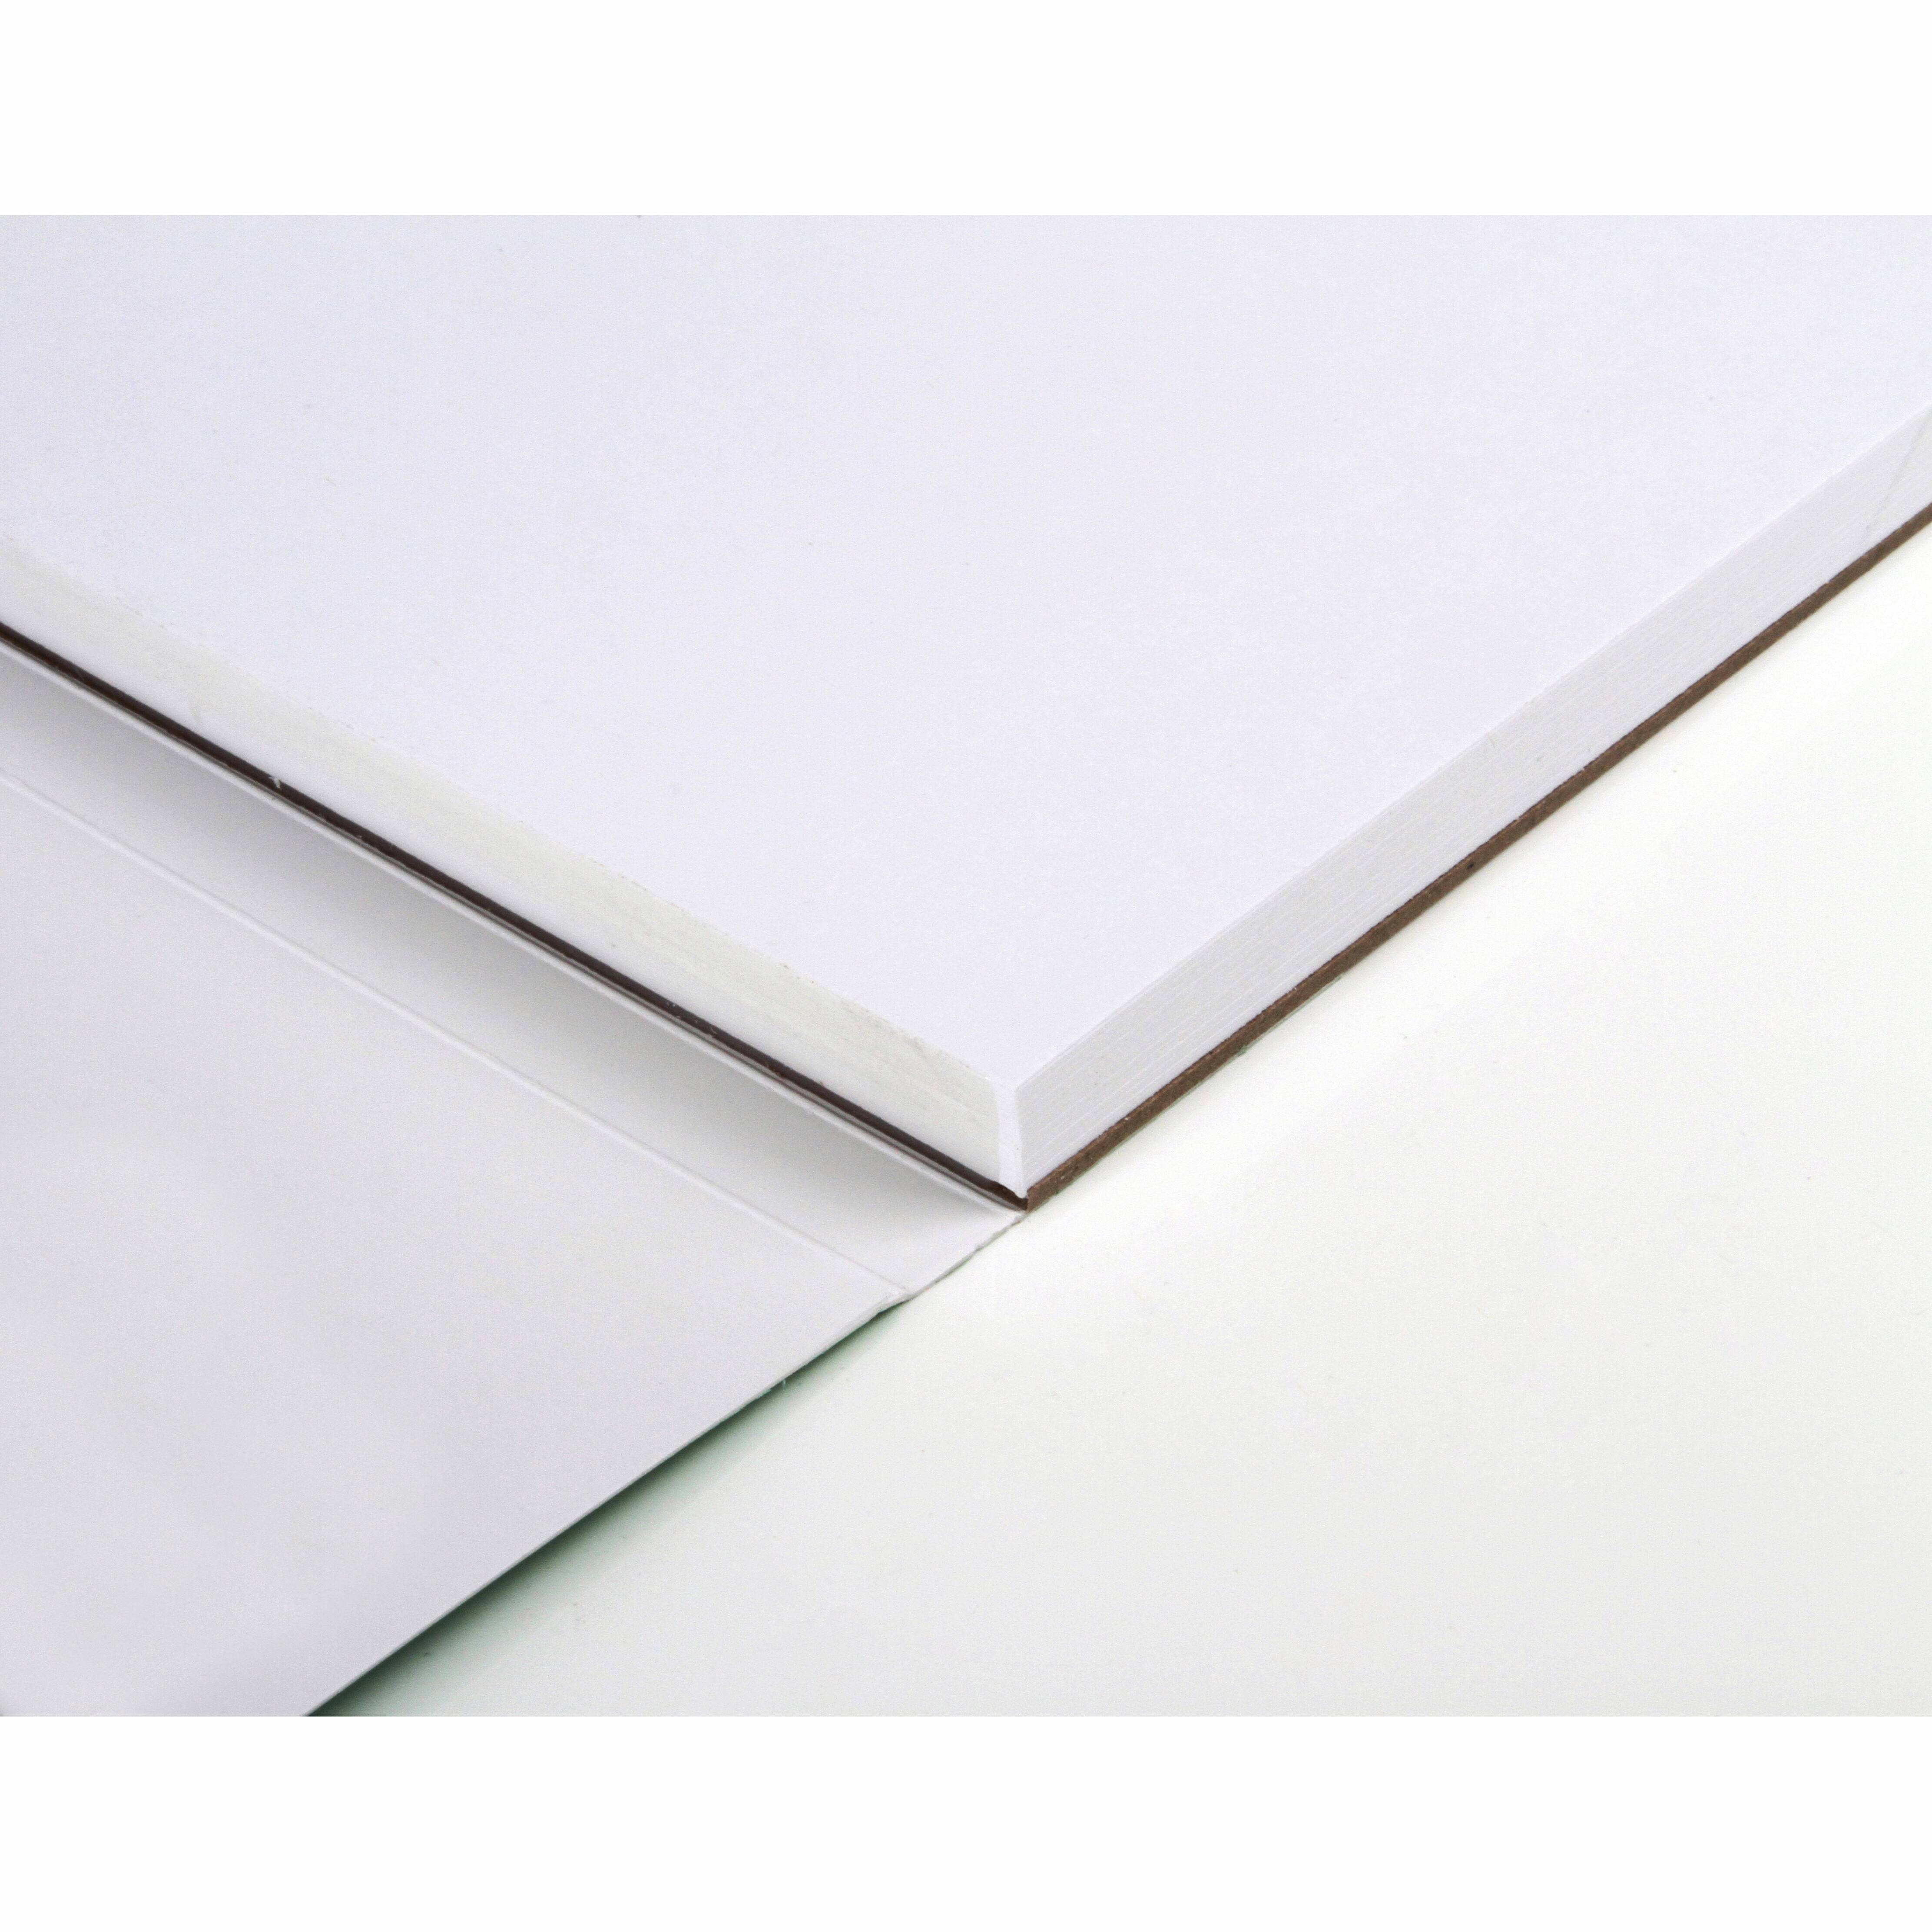 Canson® XL® Recycled Bristol Pad